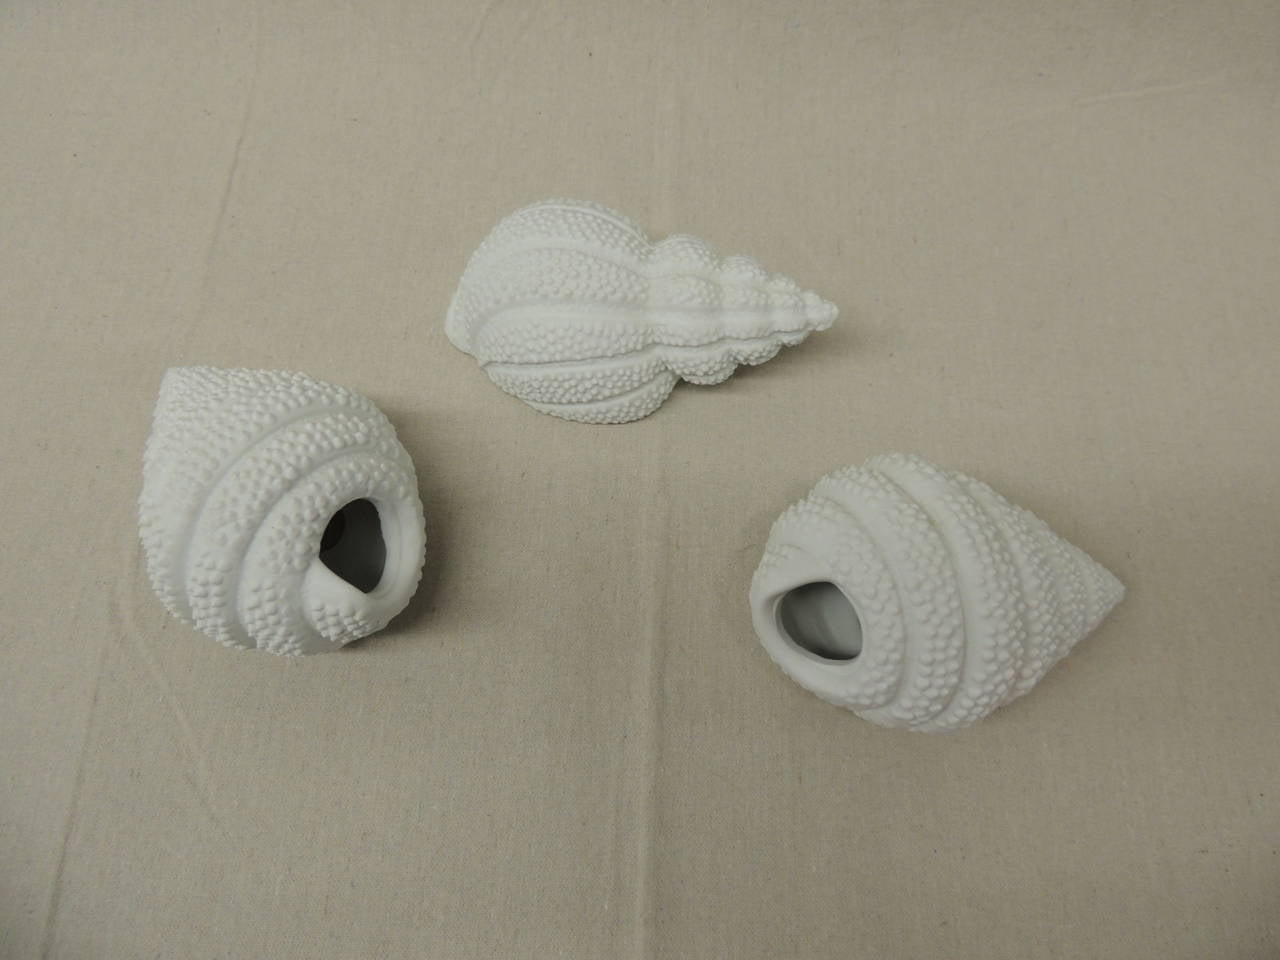 Set of (3) white bisque porcelain snail sea shells decorative figurines. Hollow inside. From 6